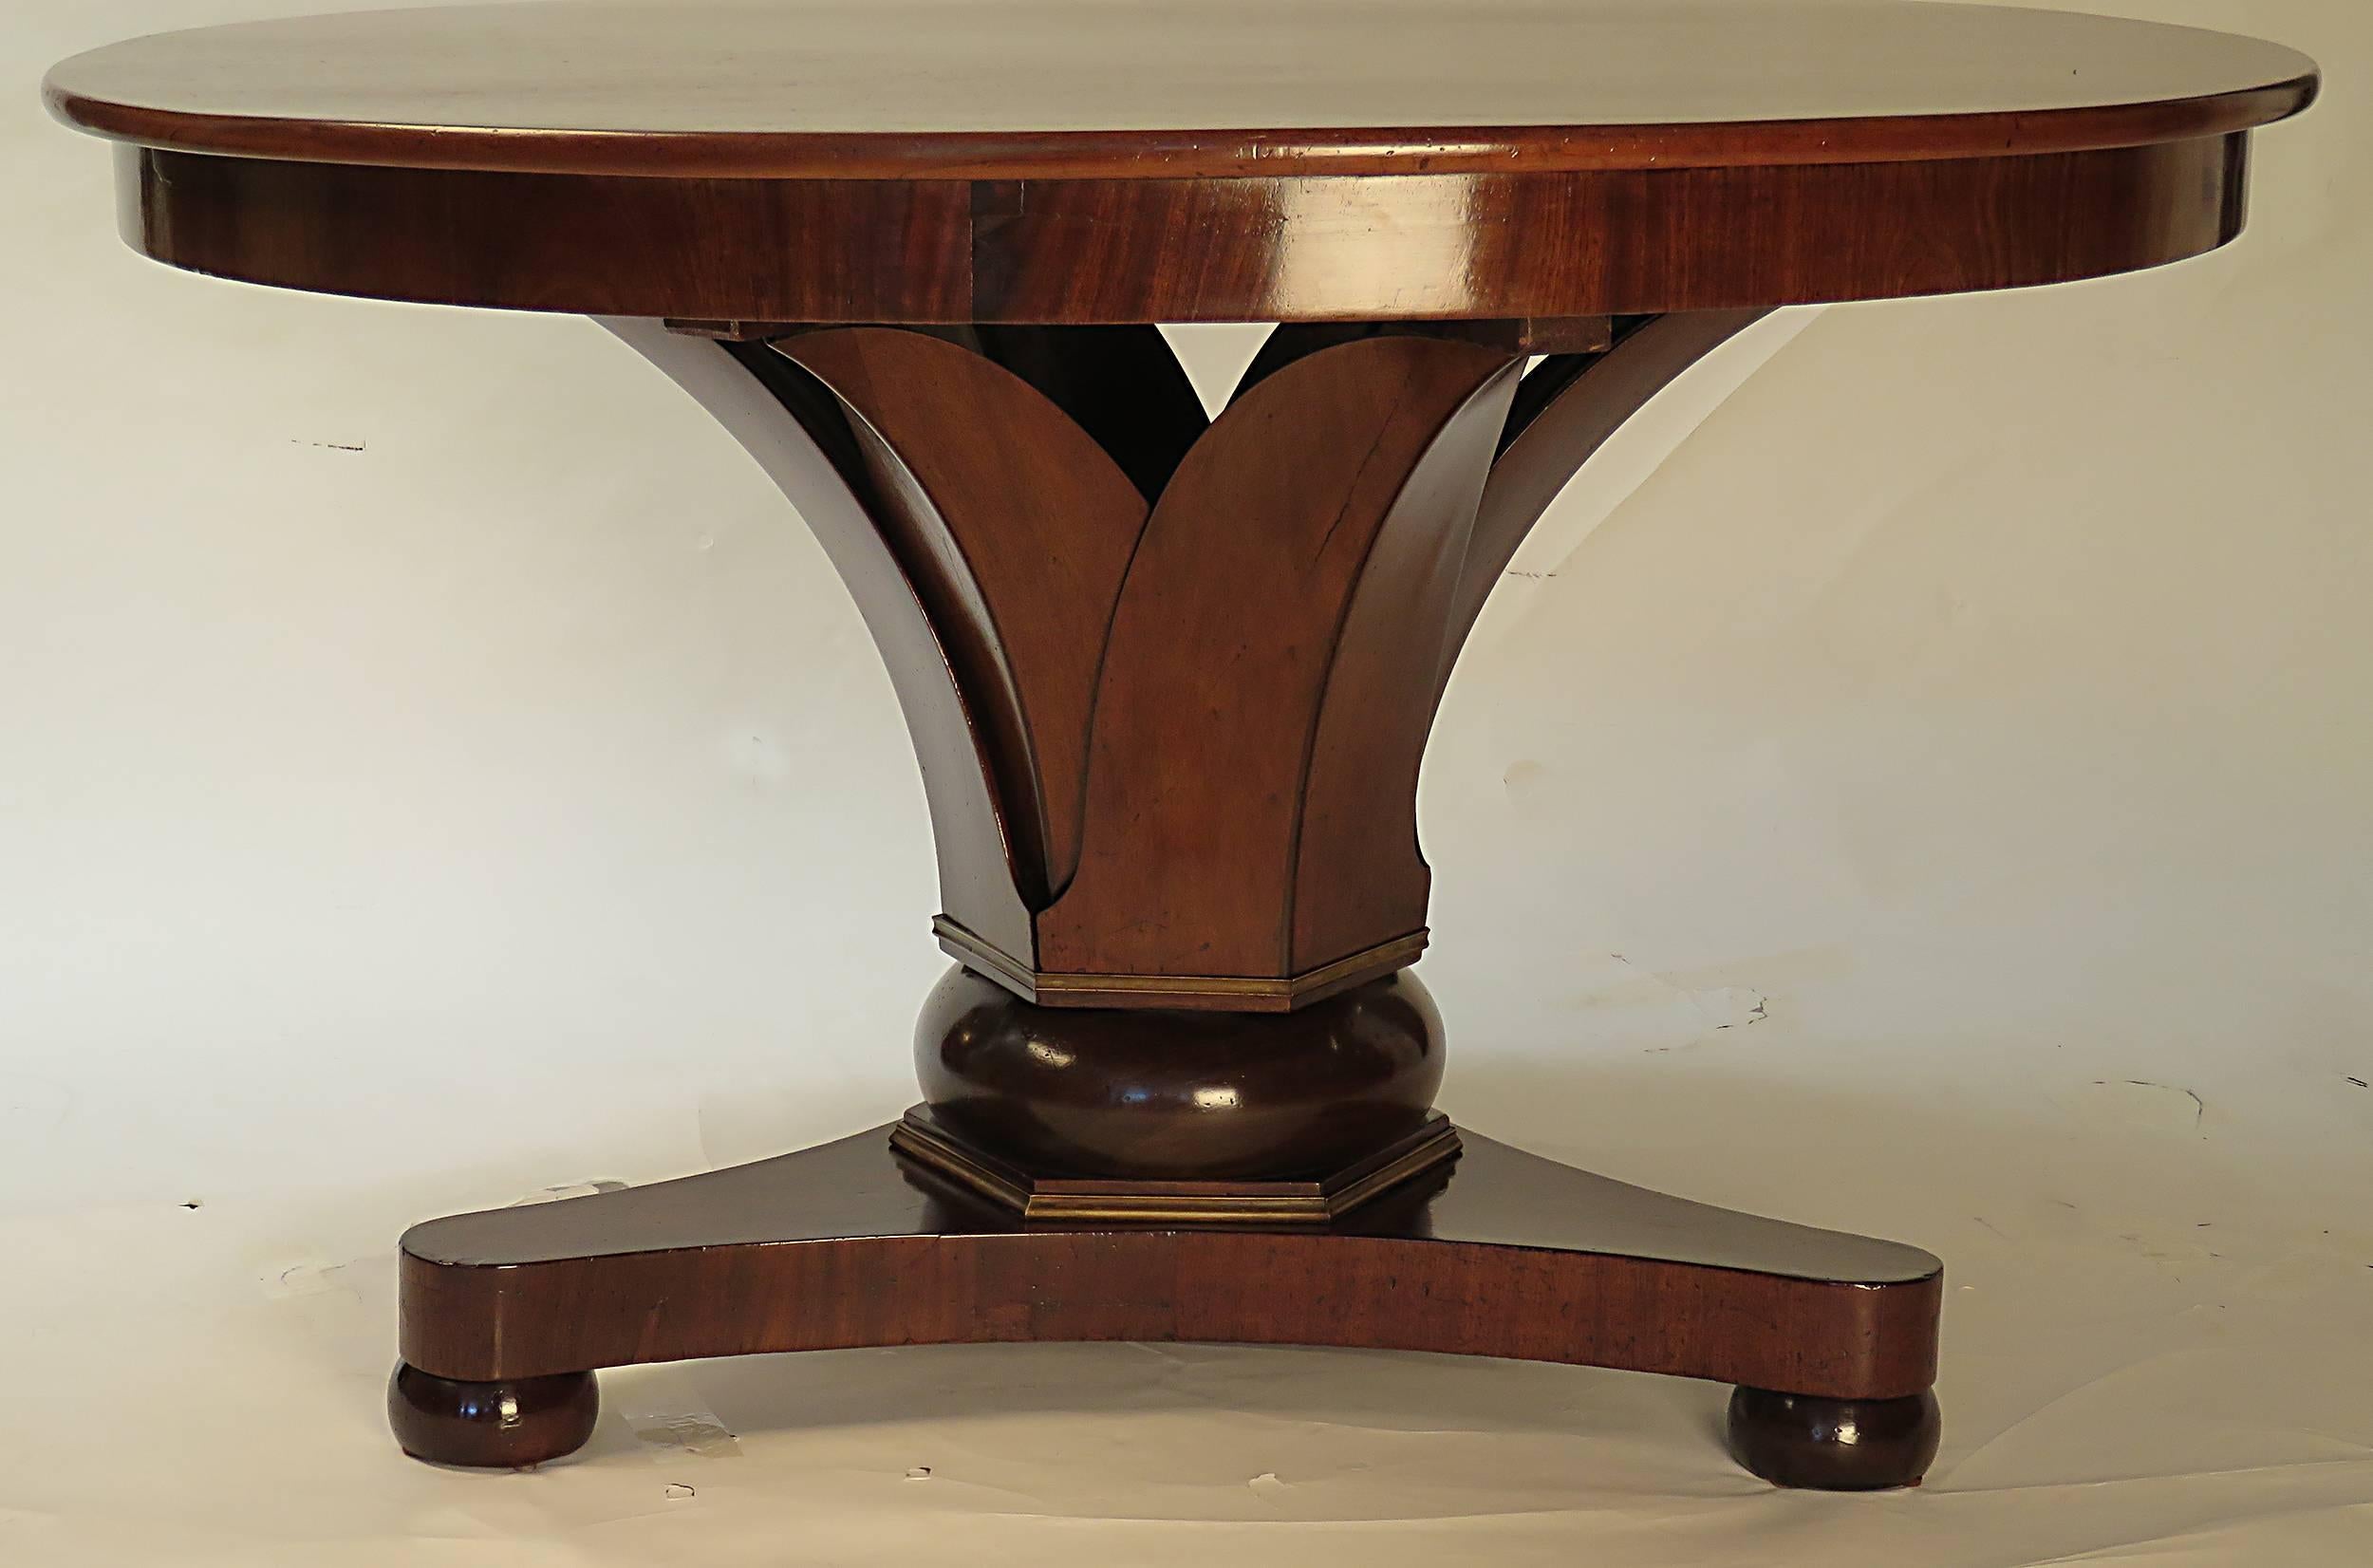 A very elegant 19th century round center table supported by stylized leaves rising from a compressed bun, framed top and bottom with gilt metal accents, standing on a tripod base with compressed bun feet. A mix of fruitwood, mahogany and boxwood